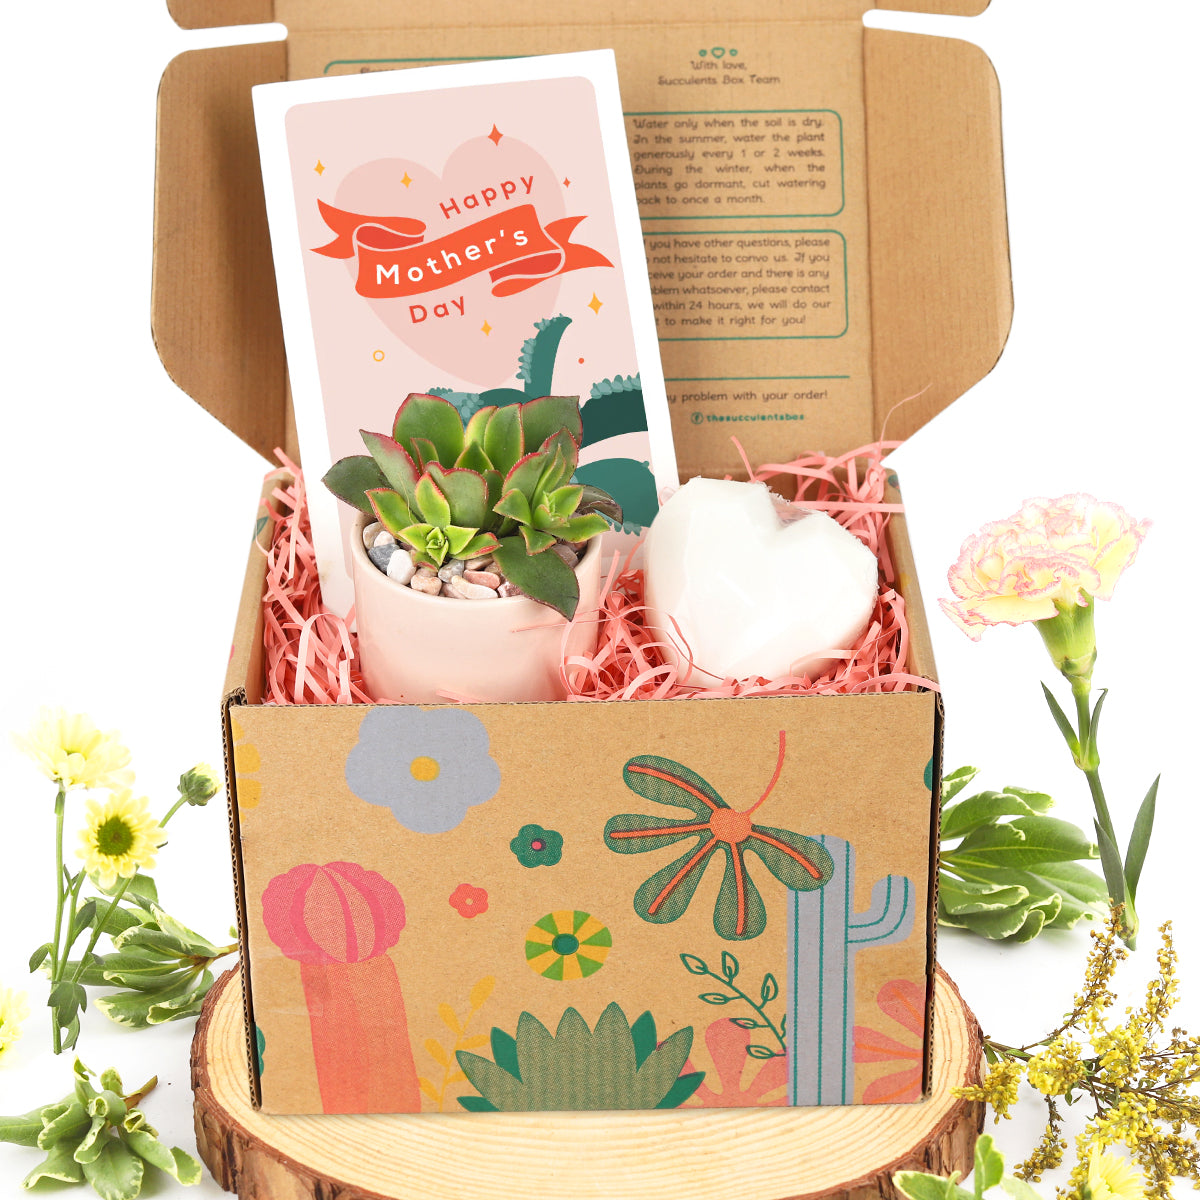 Happy Mother's Day Succulent Gift Box for sale, Plant Gift Ideas for Mom, Succulent gift box with heart soap for sale